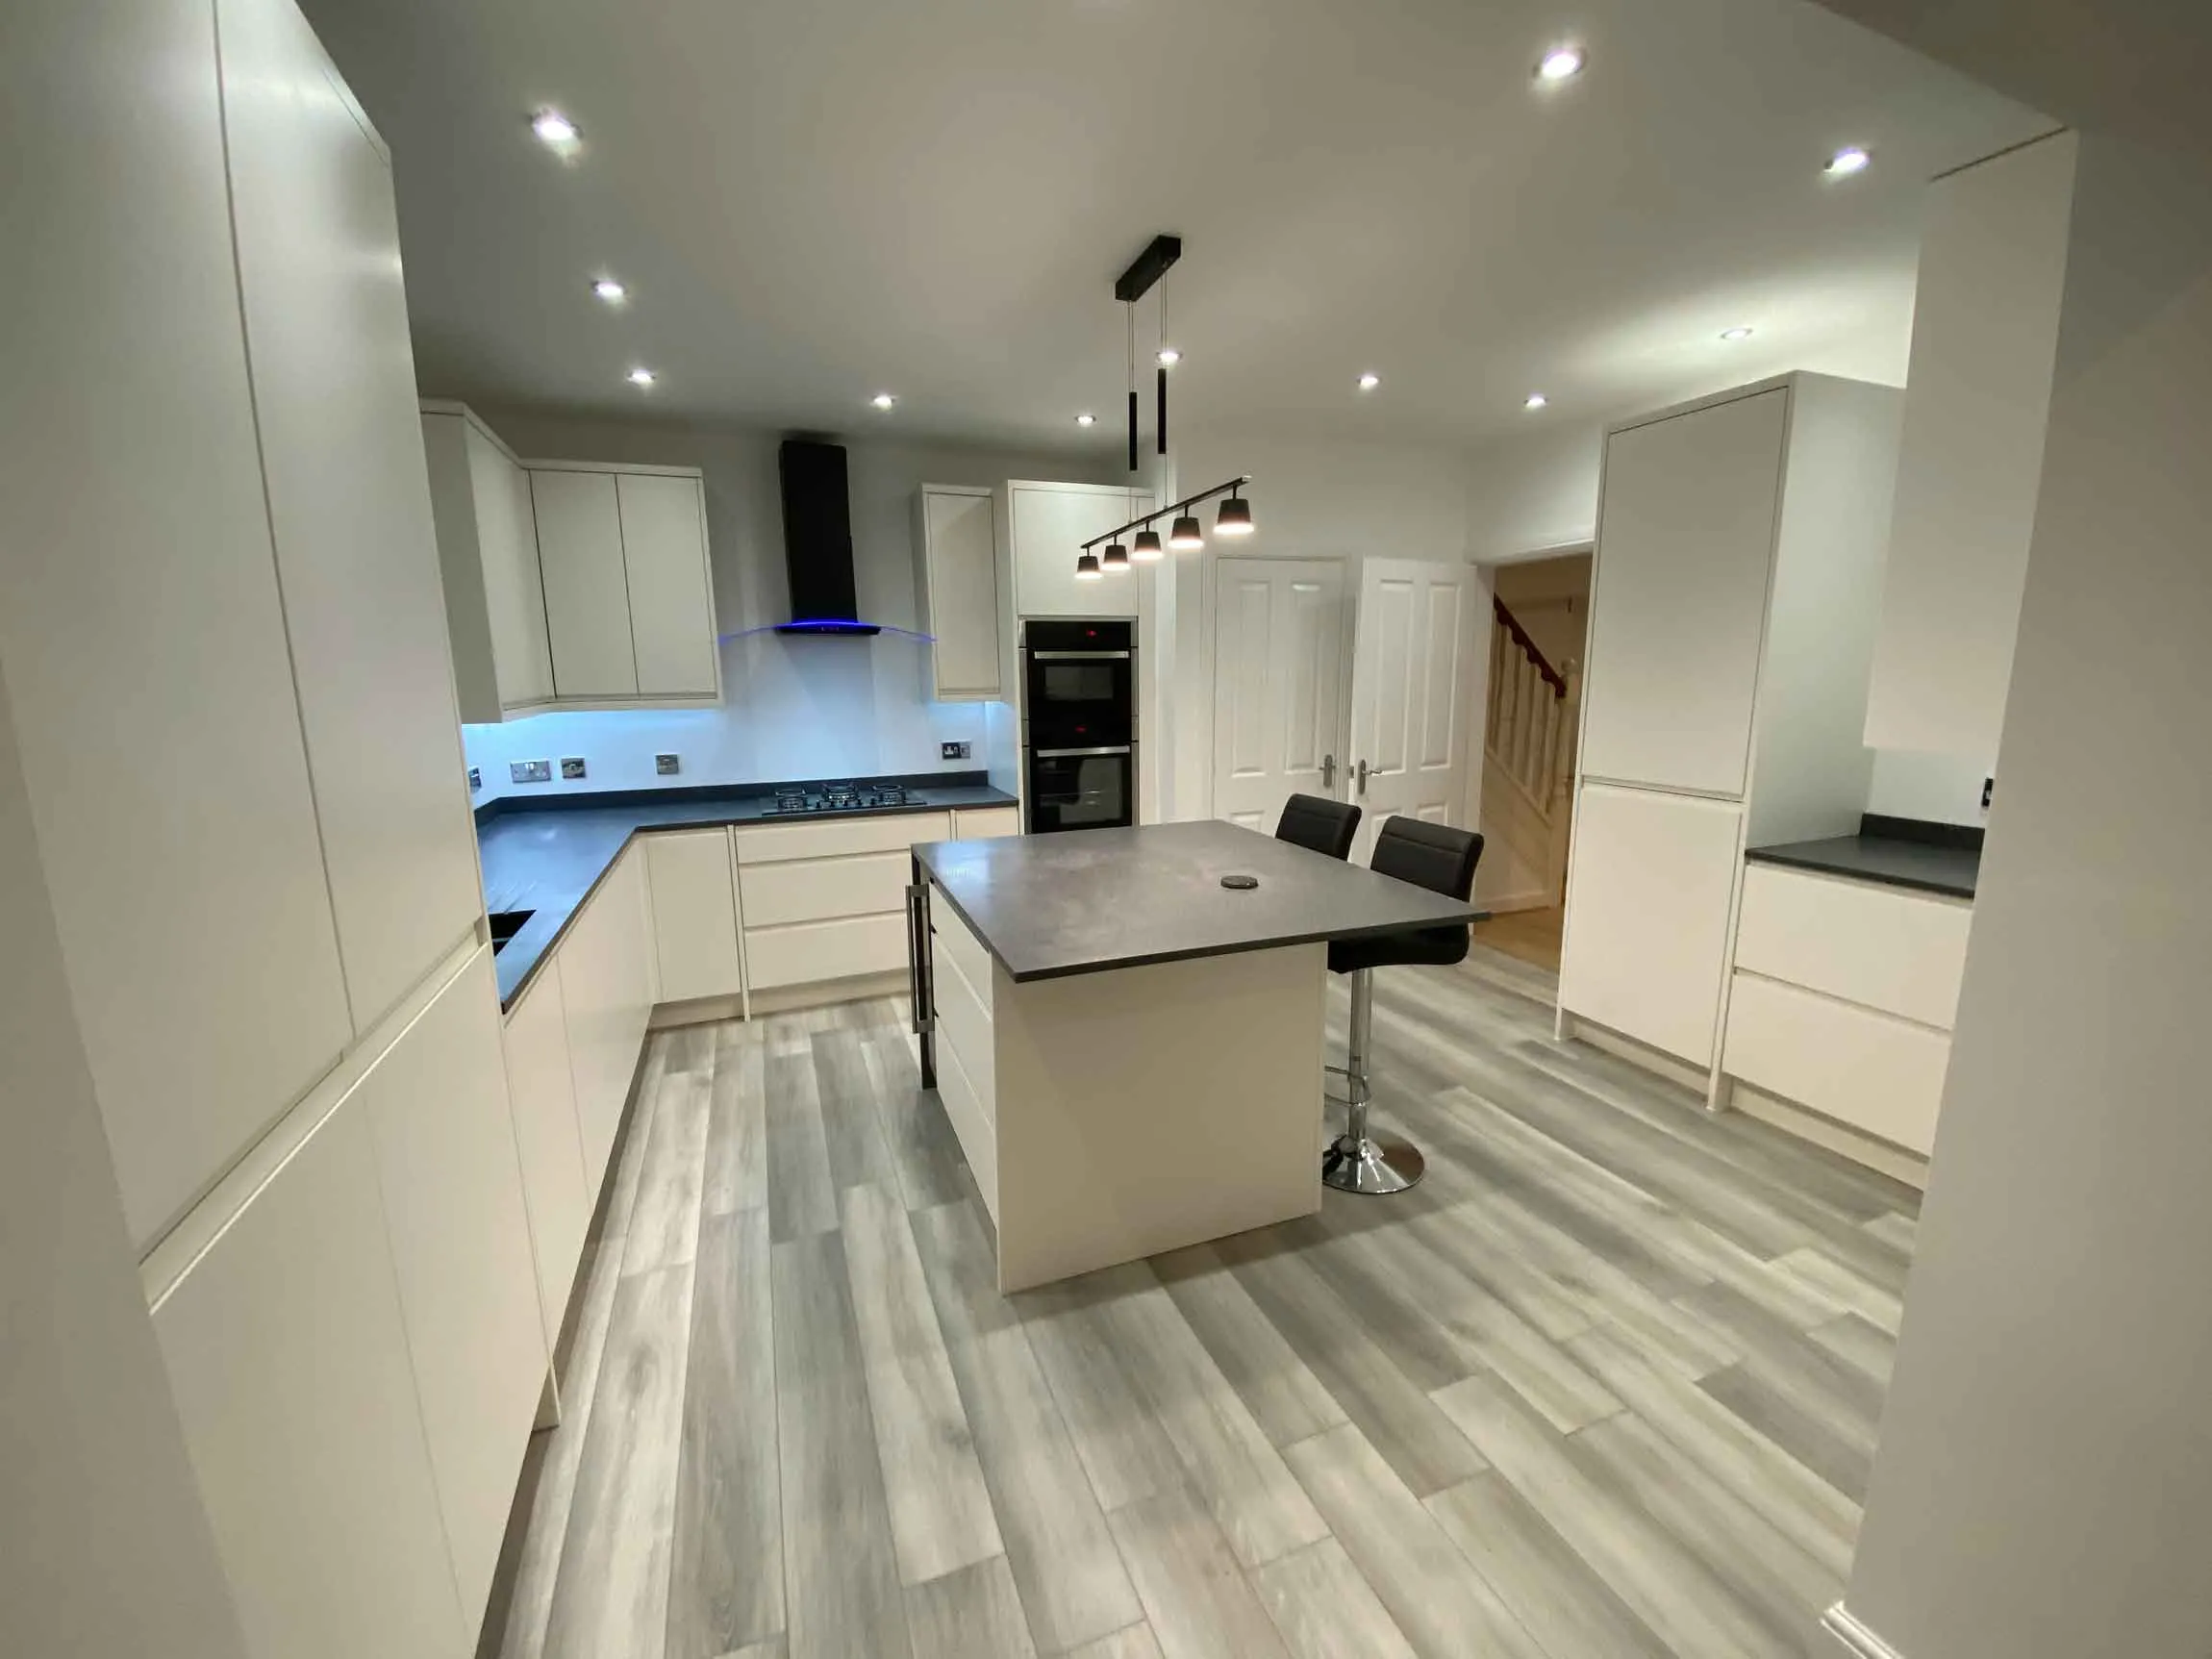 a large kitchen with a center island in the middle of the room